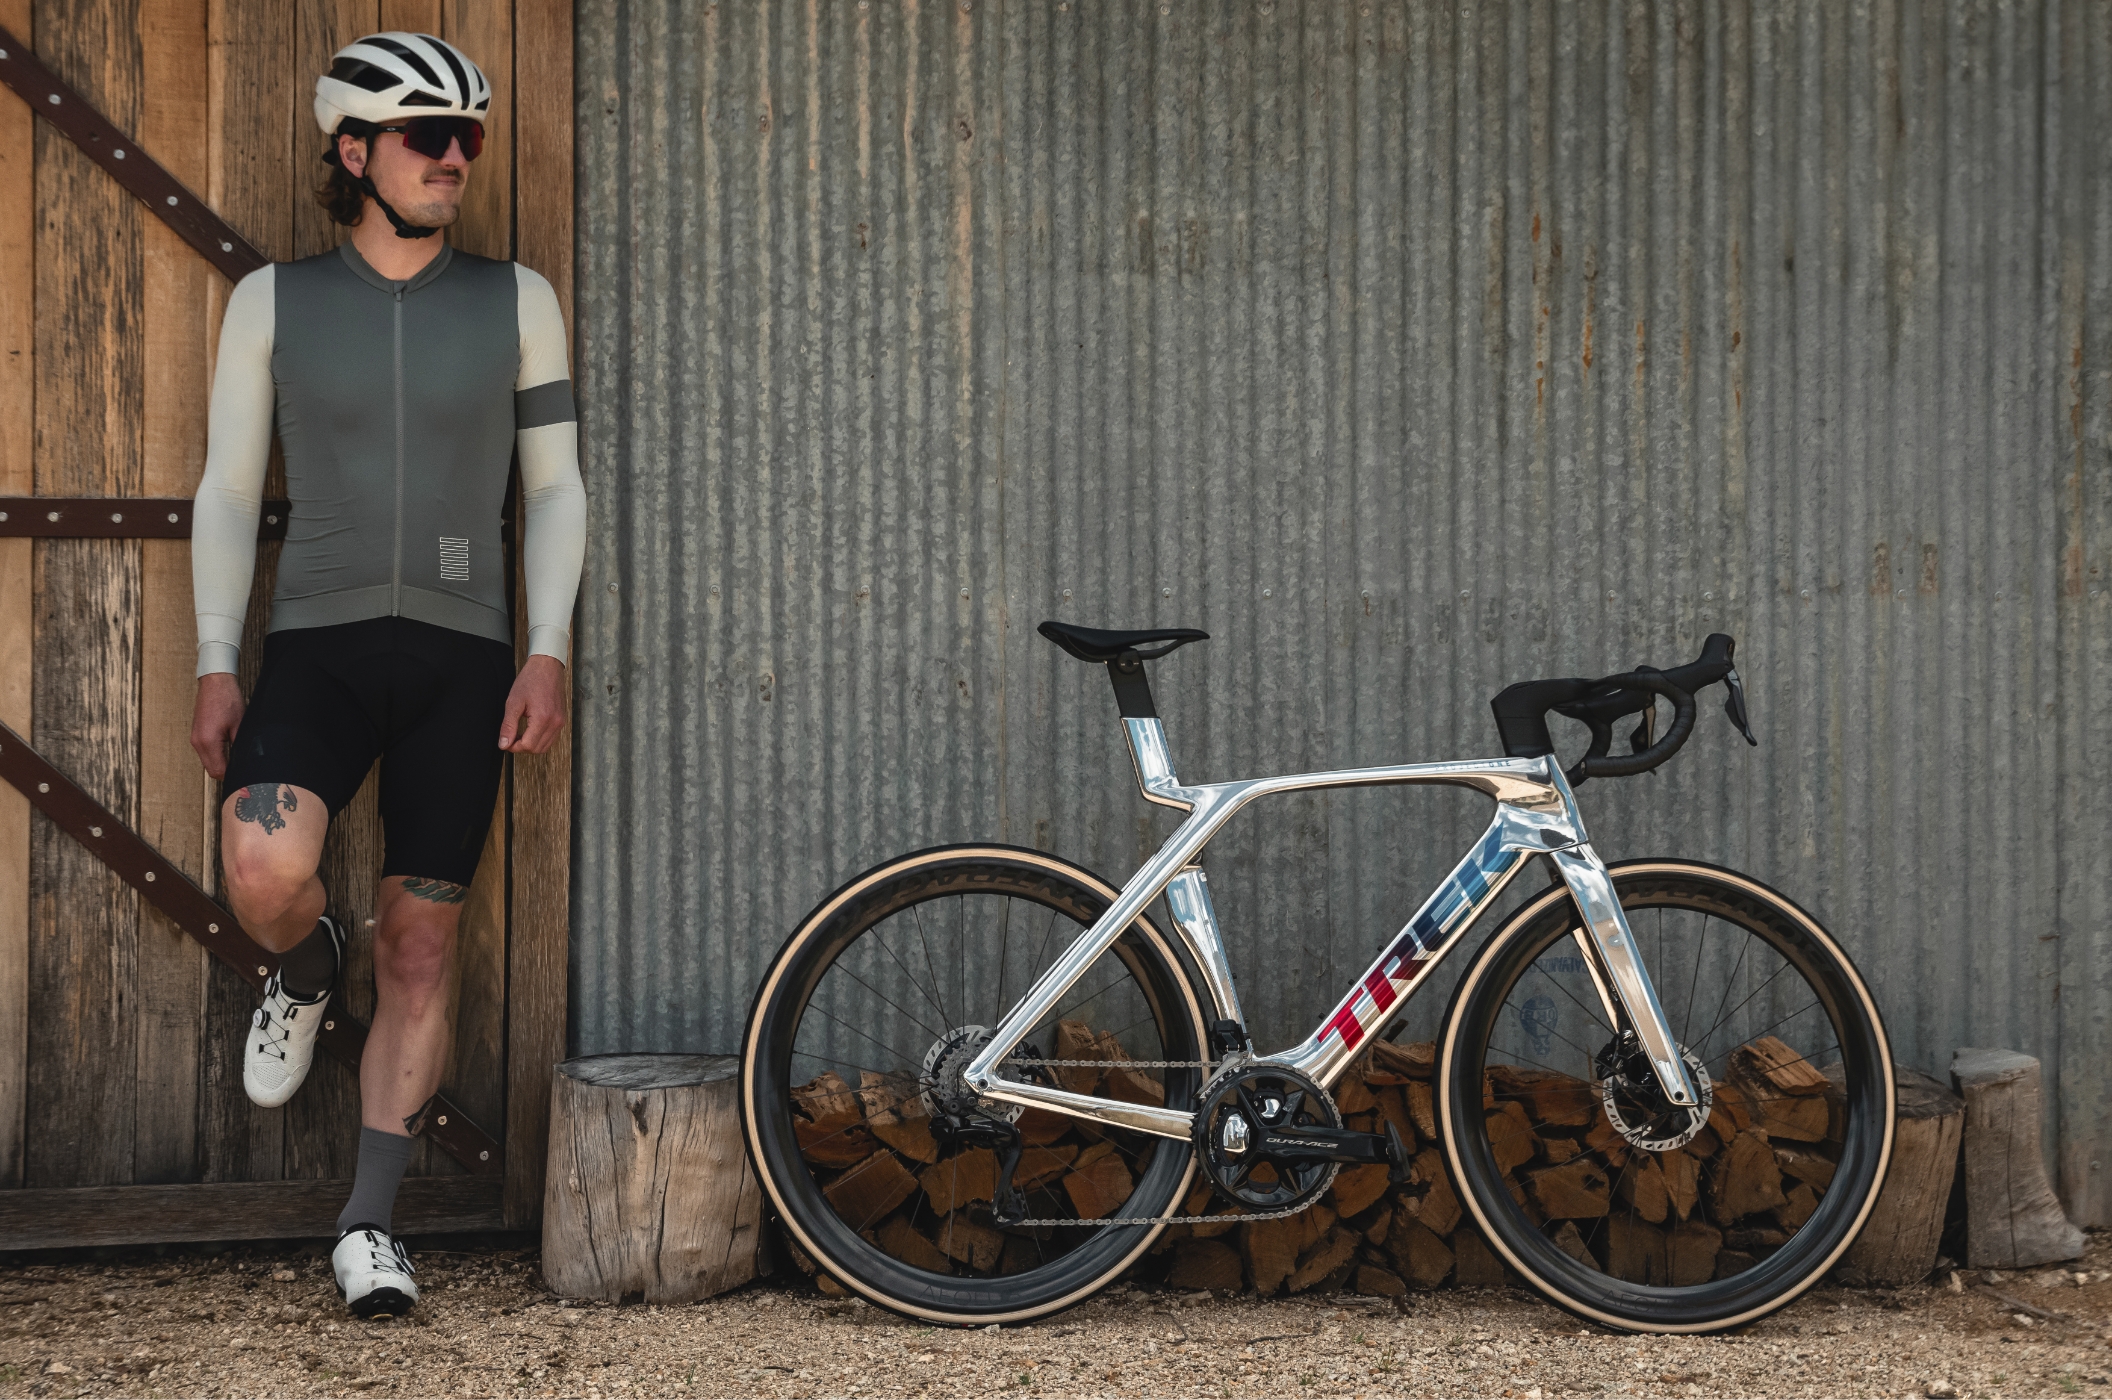 Rapha – the world‘s finest cycling clothing and accessoires